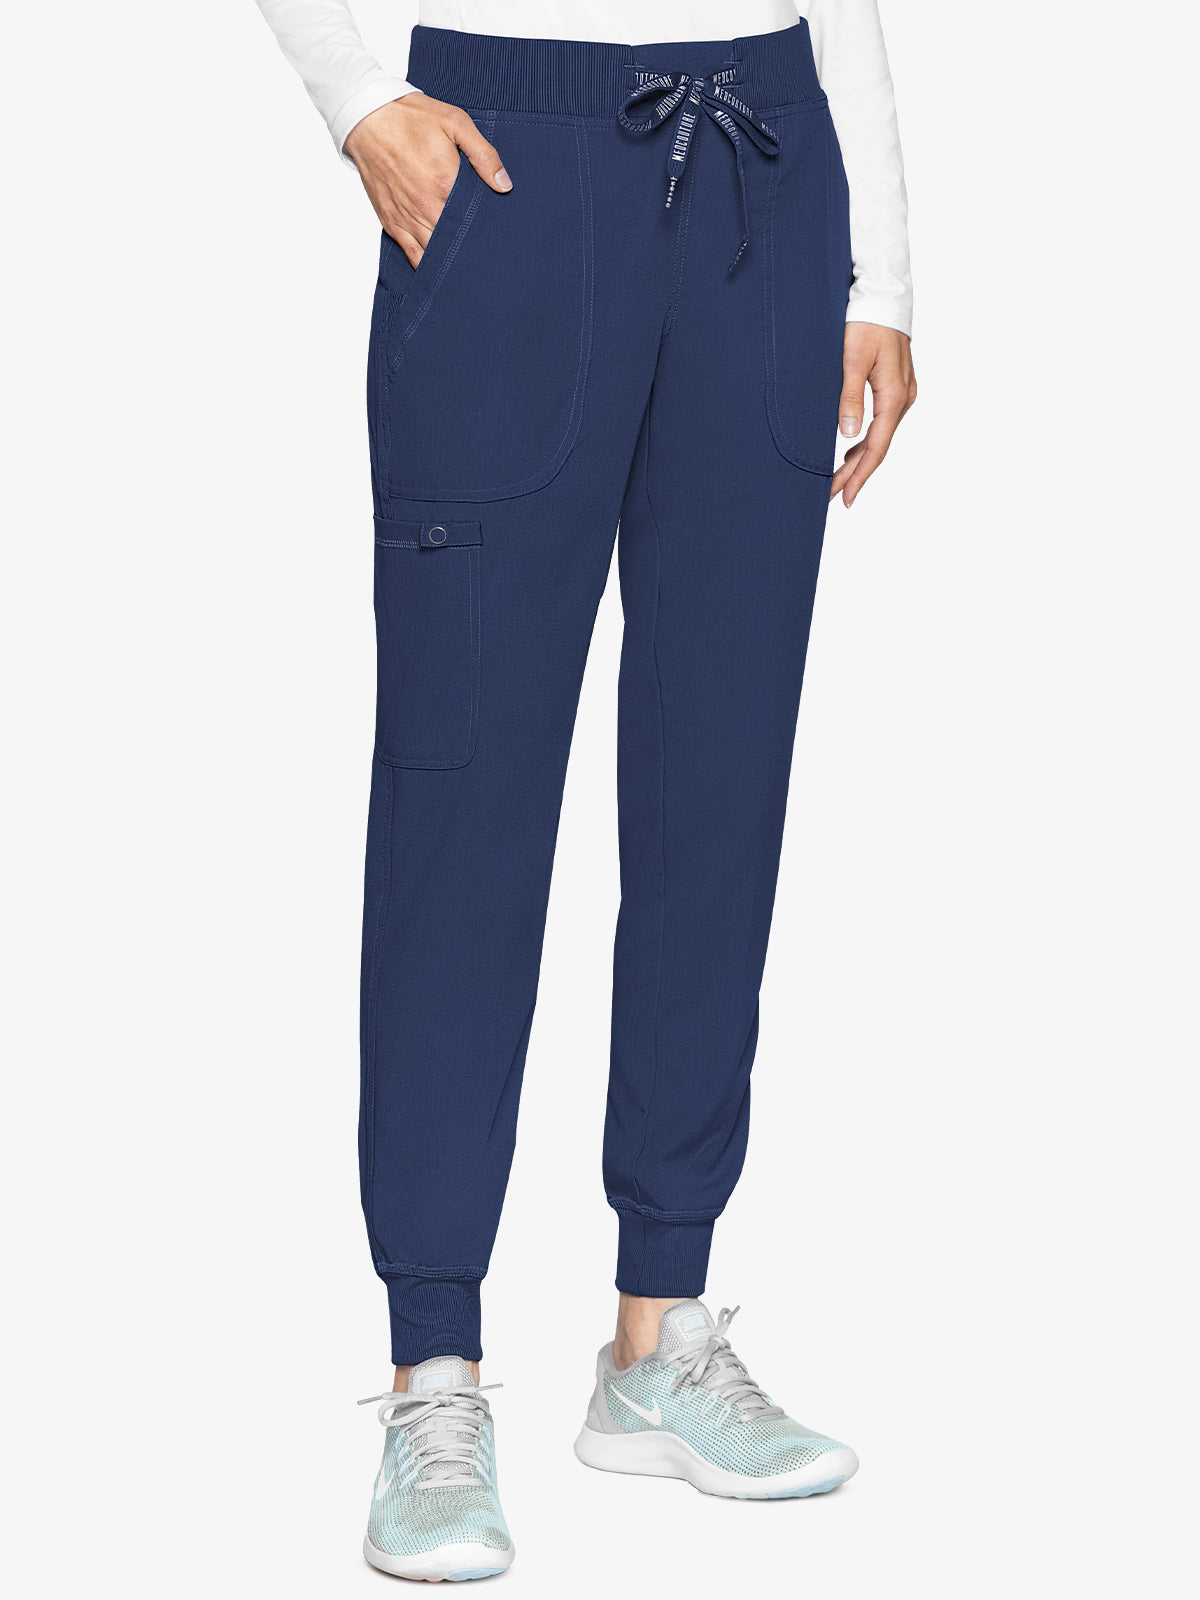 Med Couture Touch 7710 Women's Jogger Yoga Pant Navy